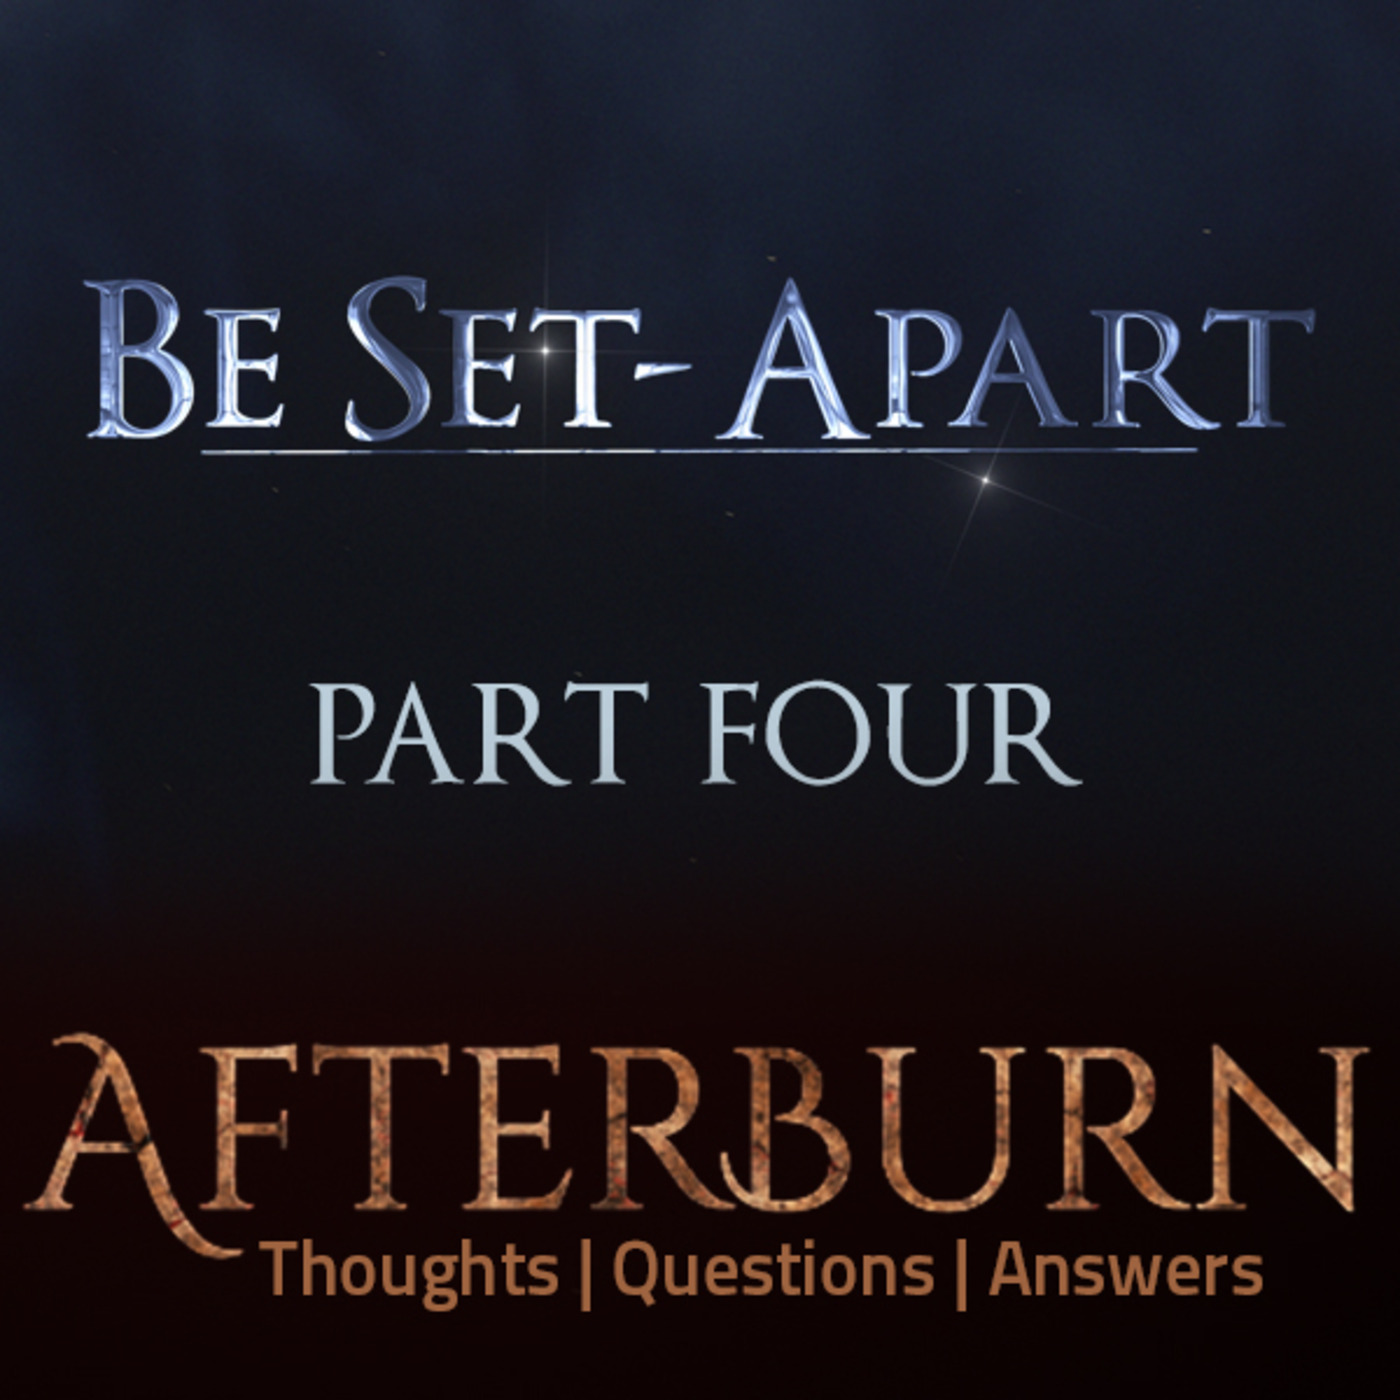 Episode 762: Afterburn | Thoughts, Q&A on Be Set-Apart | Part Four